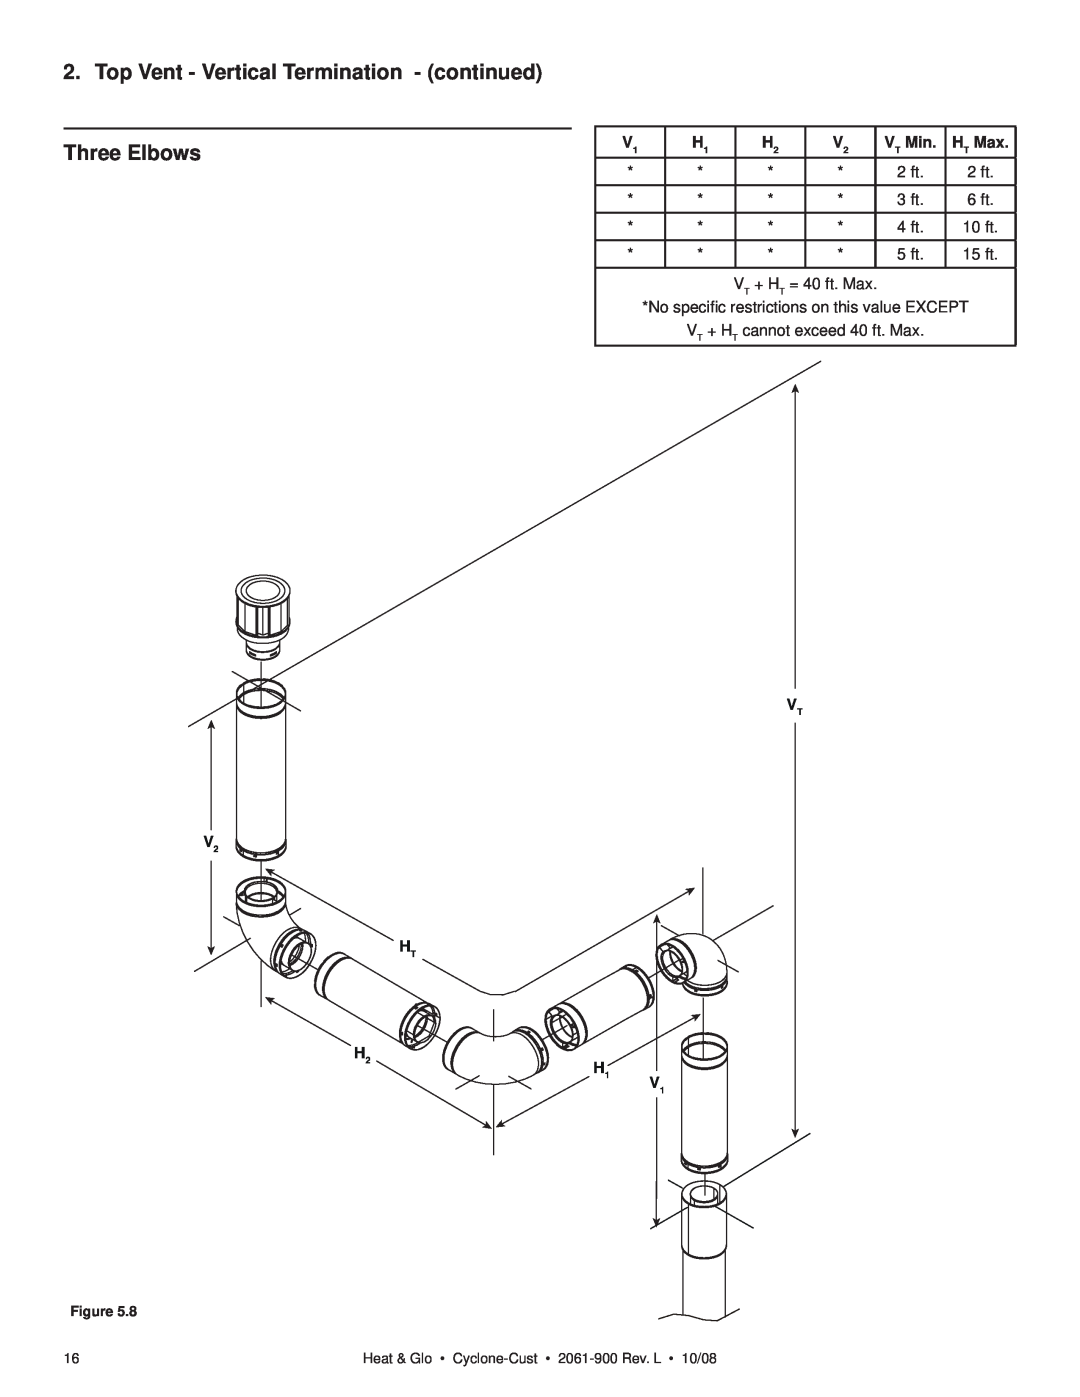 Hearth and Home Technologies Cyclone-Cust Top Vent - Vertical Termination - continued, Three Elbows, VT Min, HT Max 